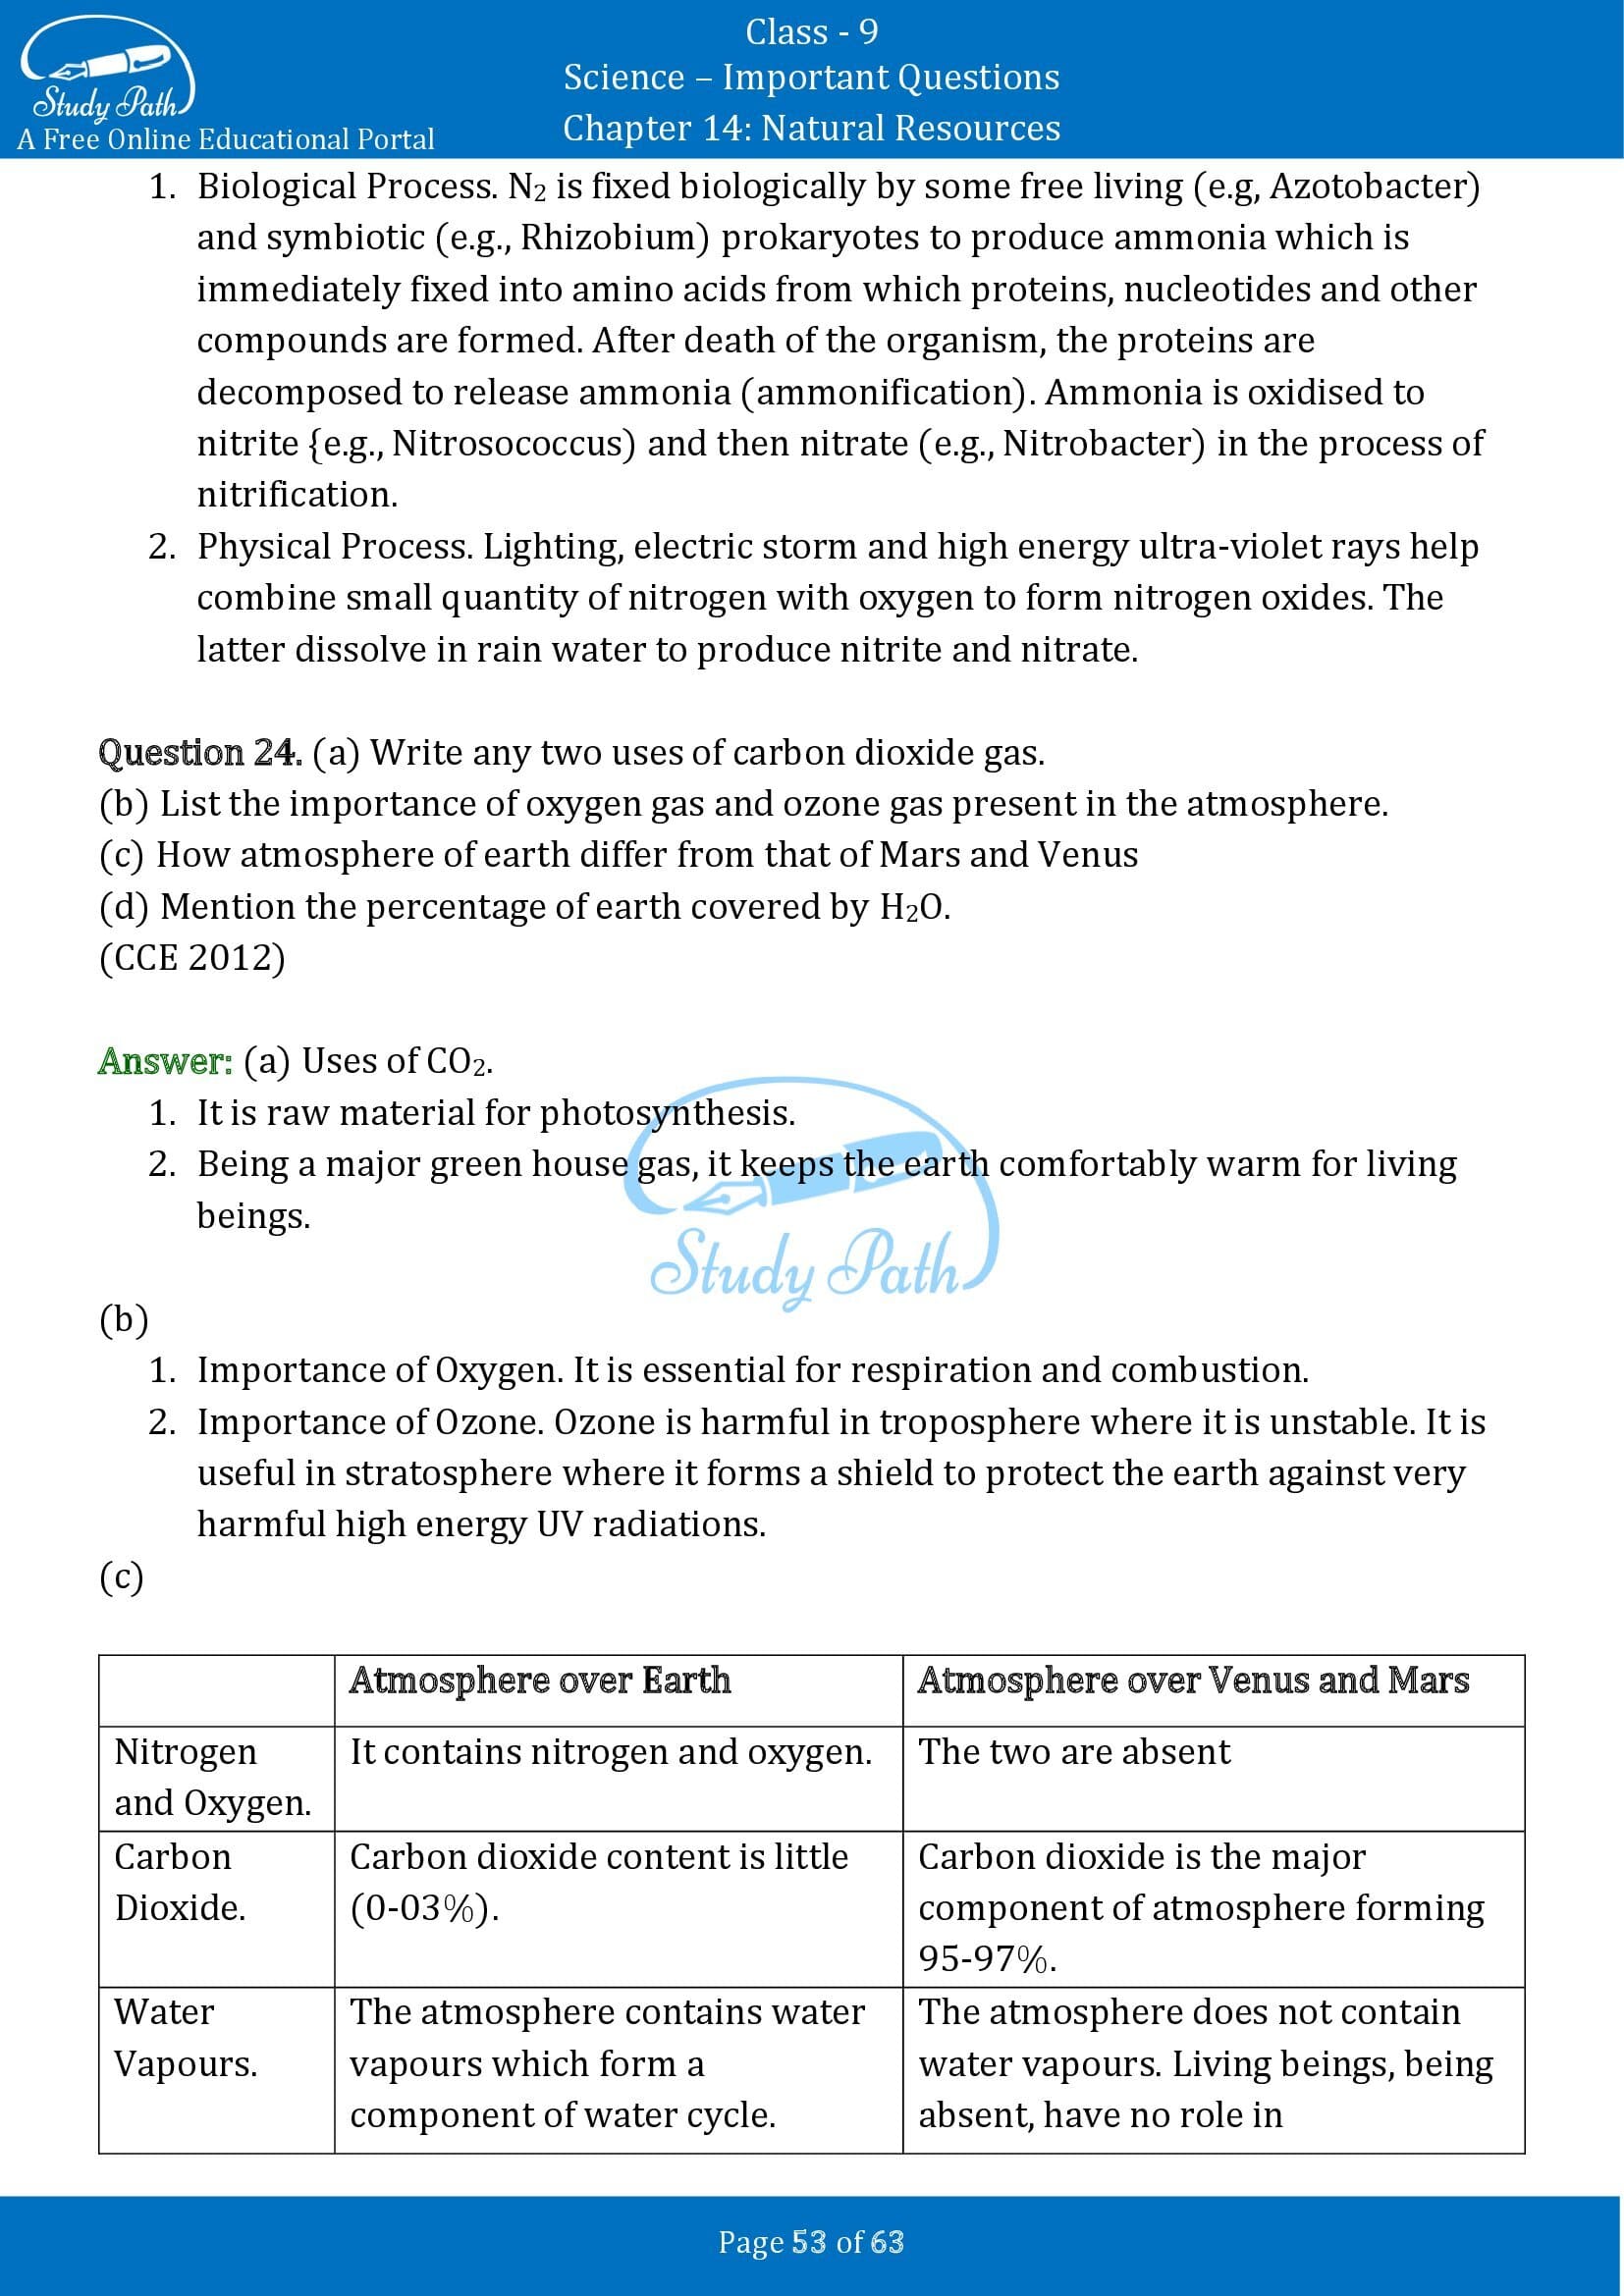 Important Questions for Class 9 Science Chapter 14 Natural Resources 00053